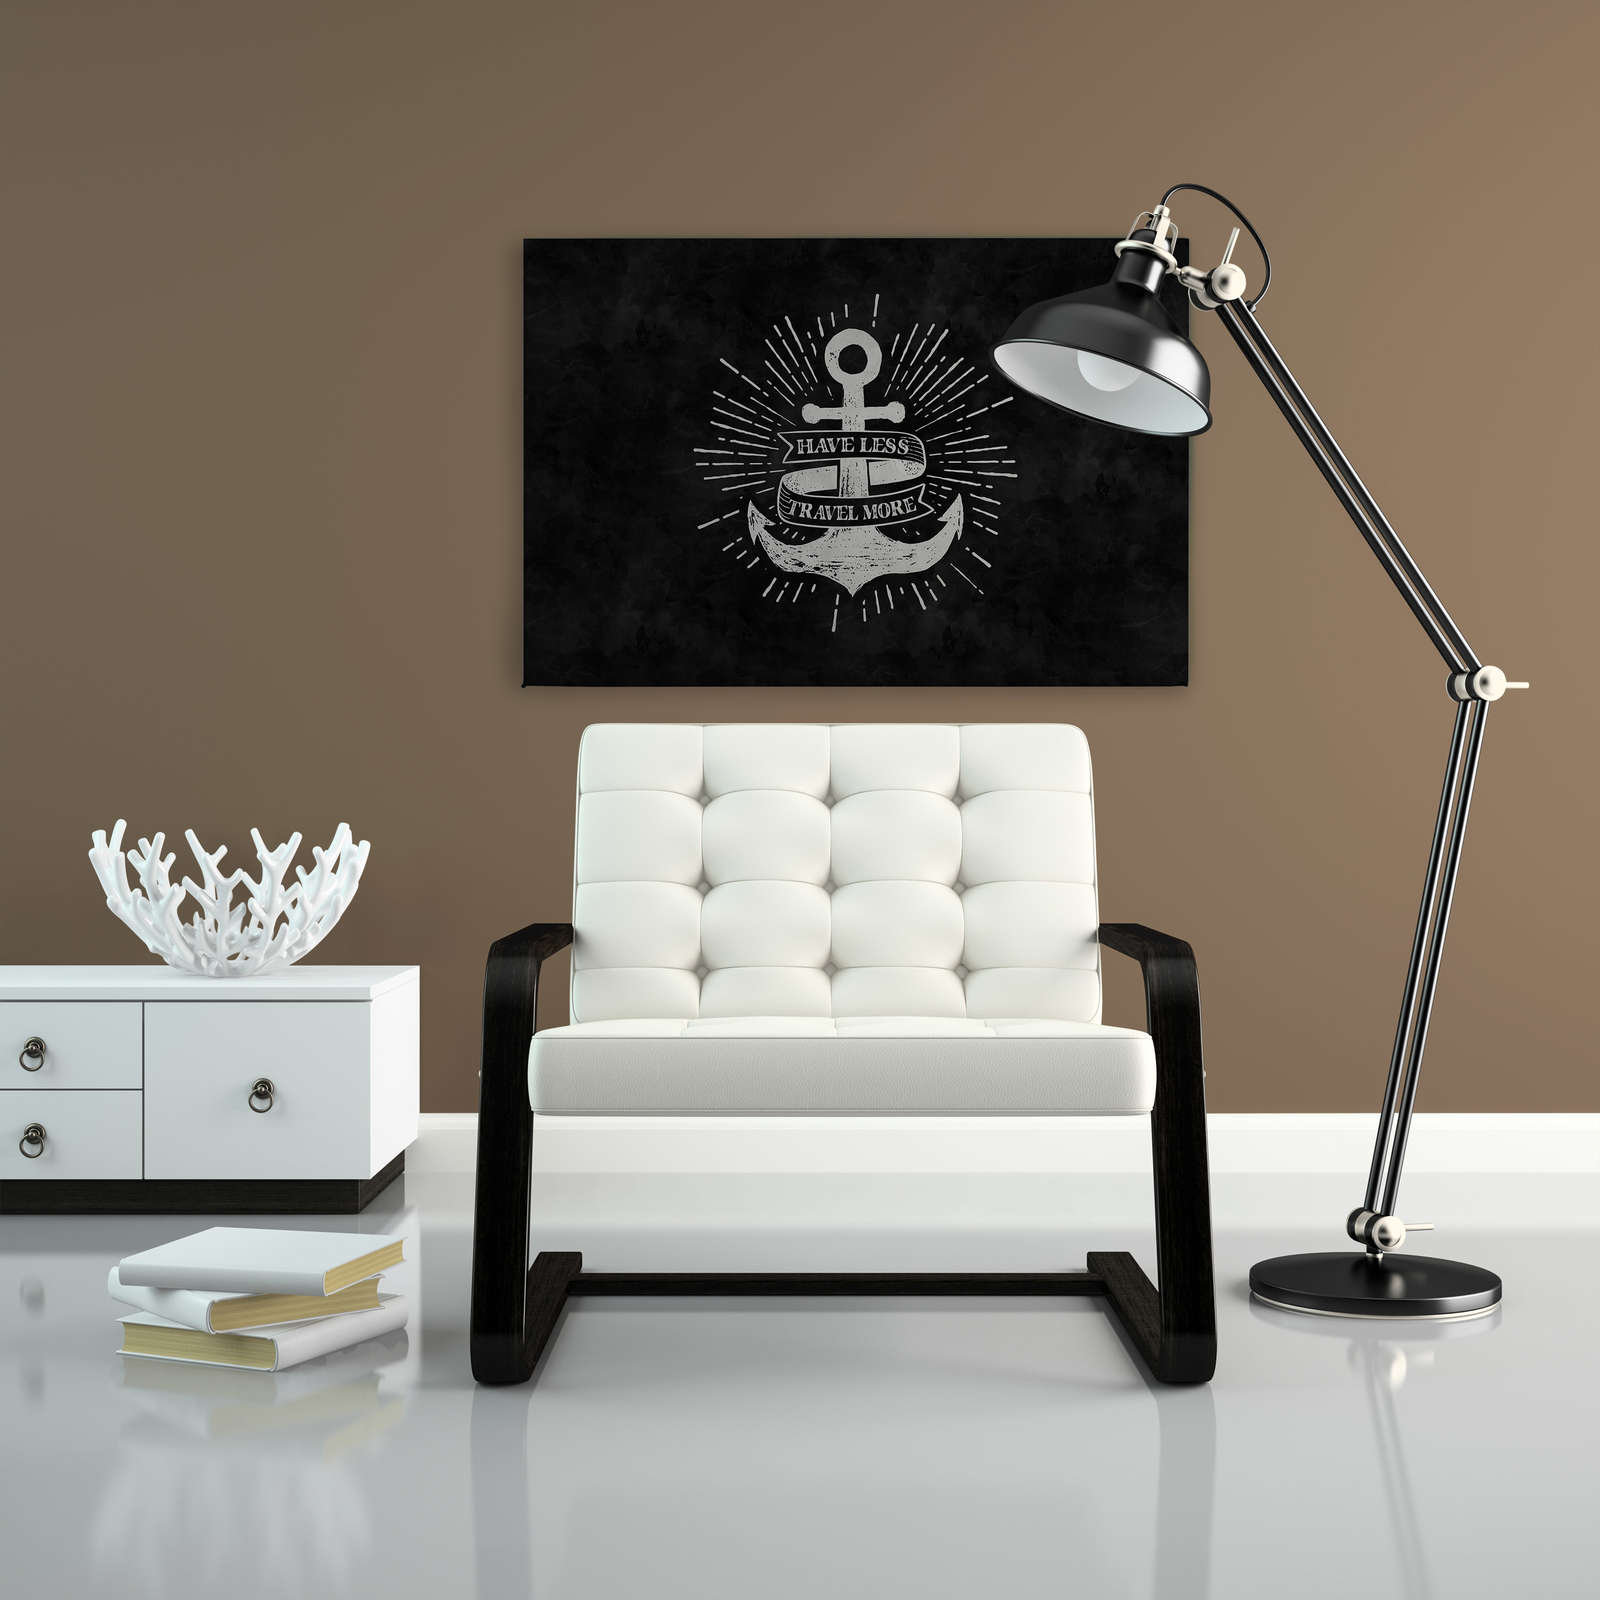             Black and White Chalkboard Look Canvas Painting Anchor Design - 0.90 m x 0.60 m
        